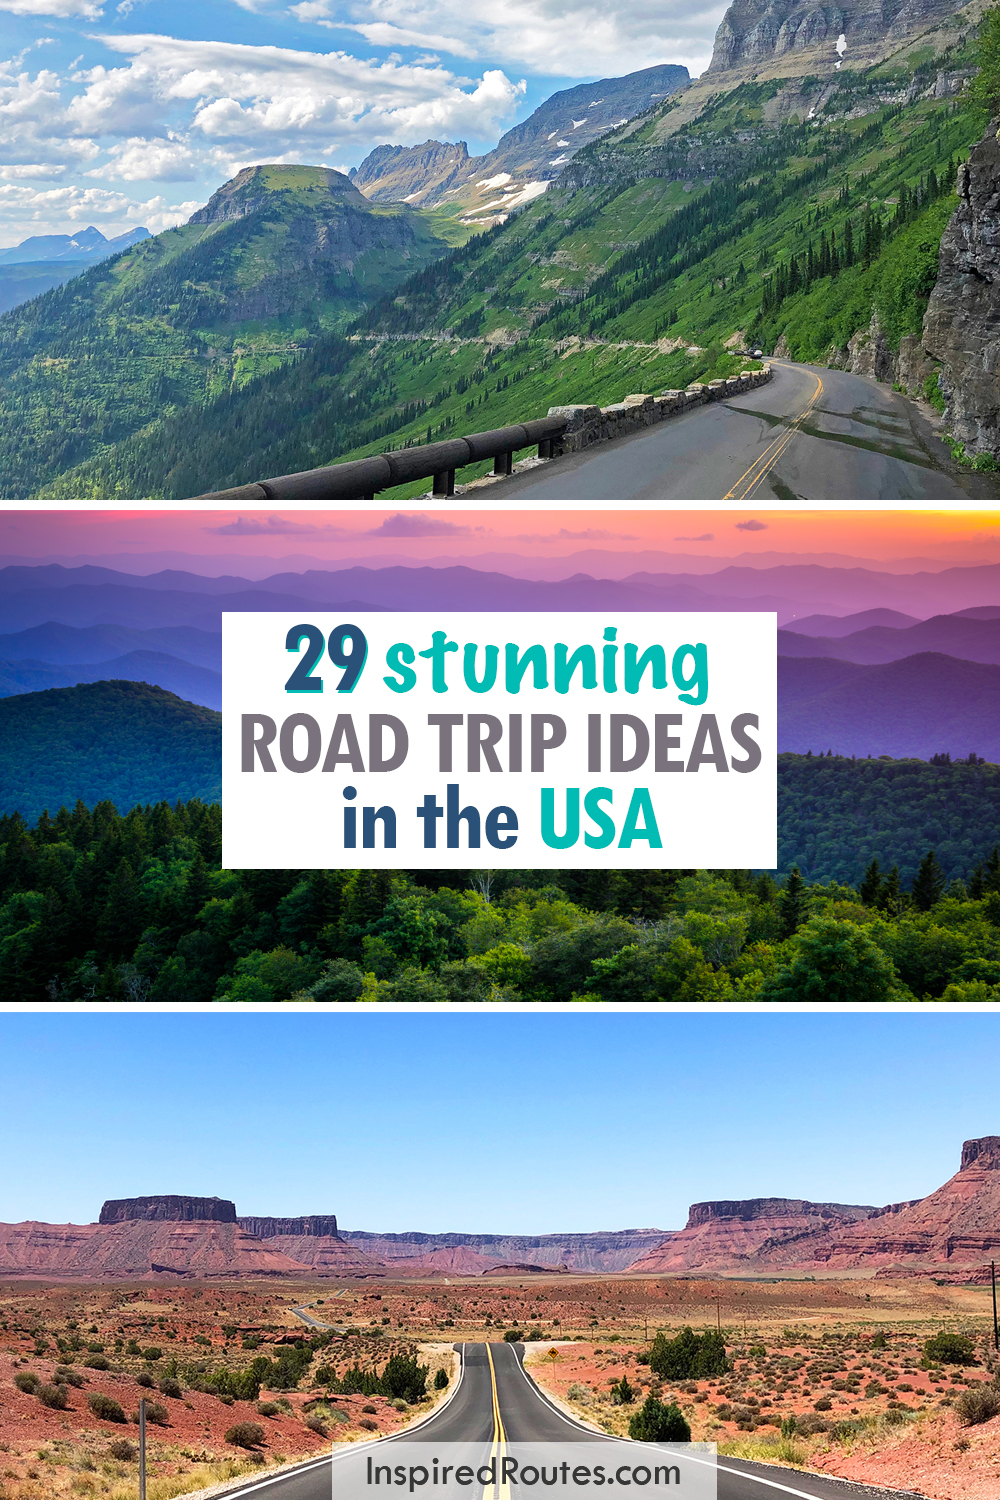 29 stunning road trip ideas in the USA with photos of mountain road sunset over hillside and road through desert scene